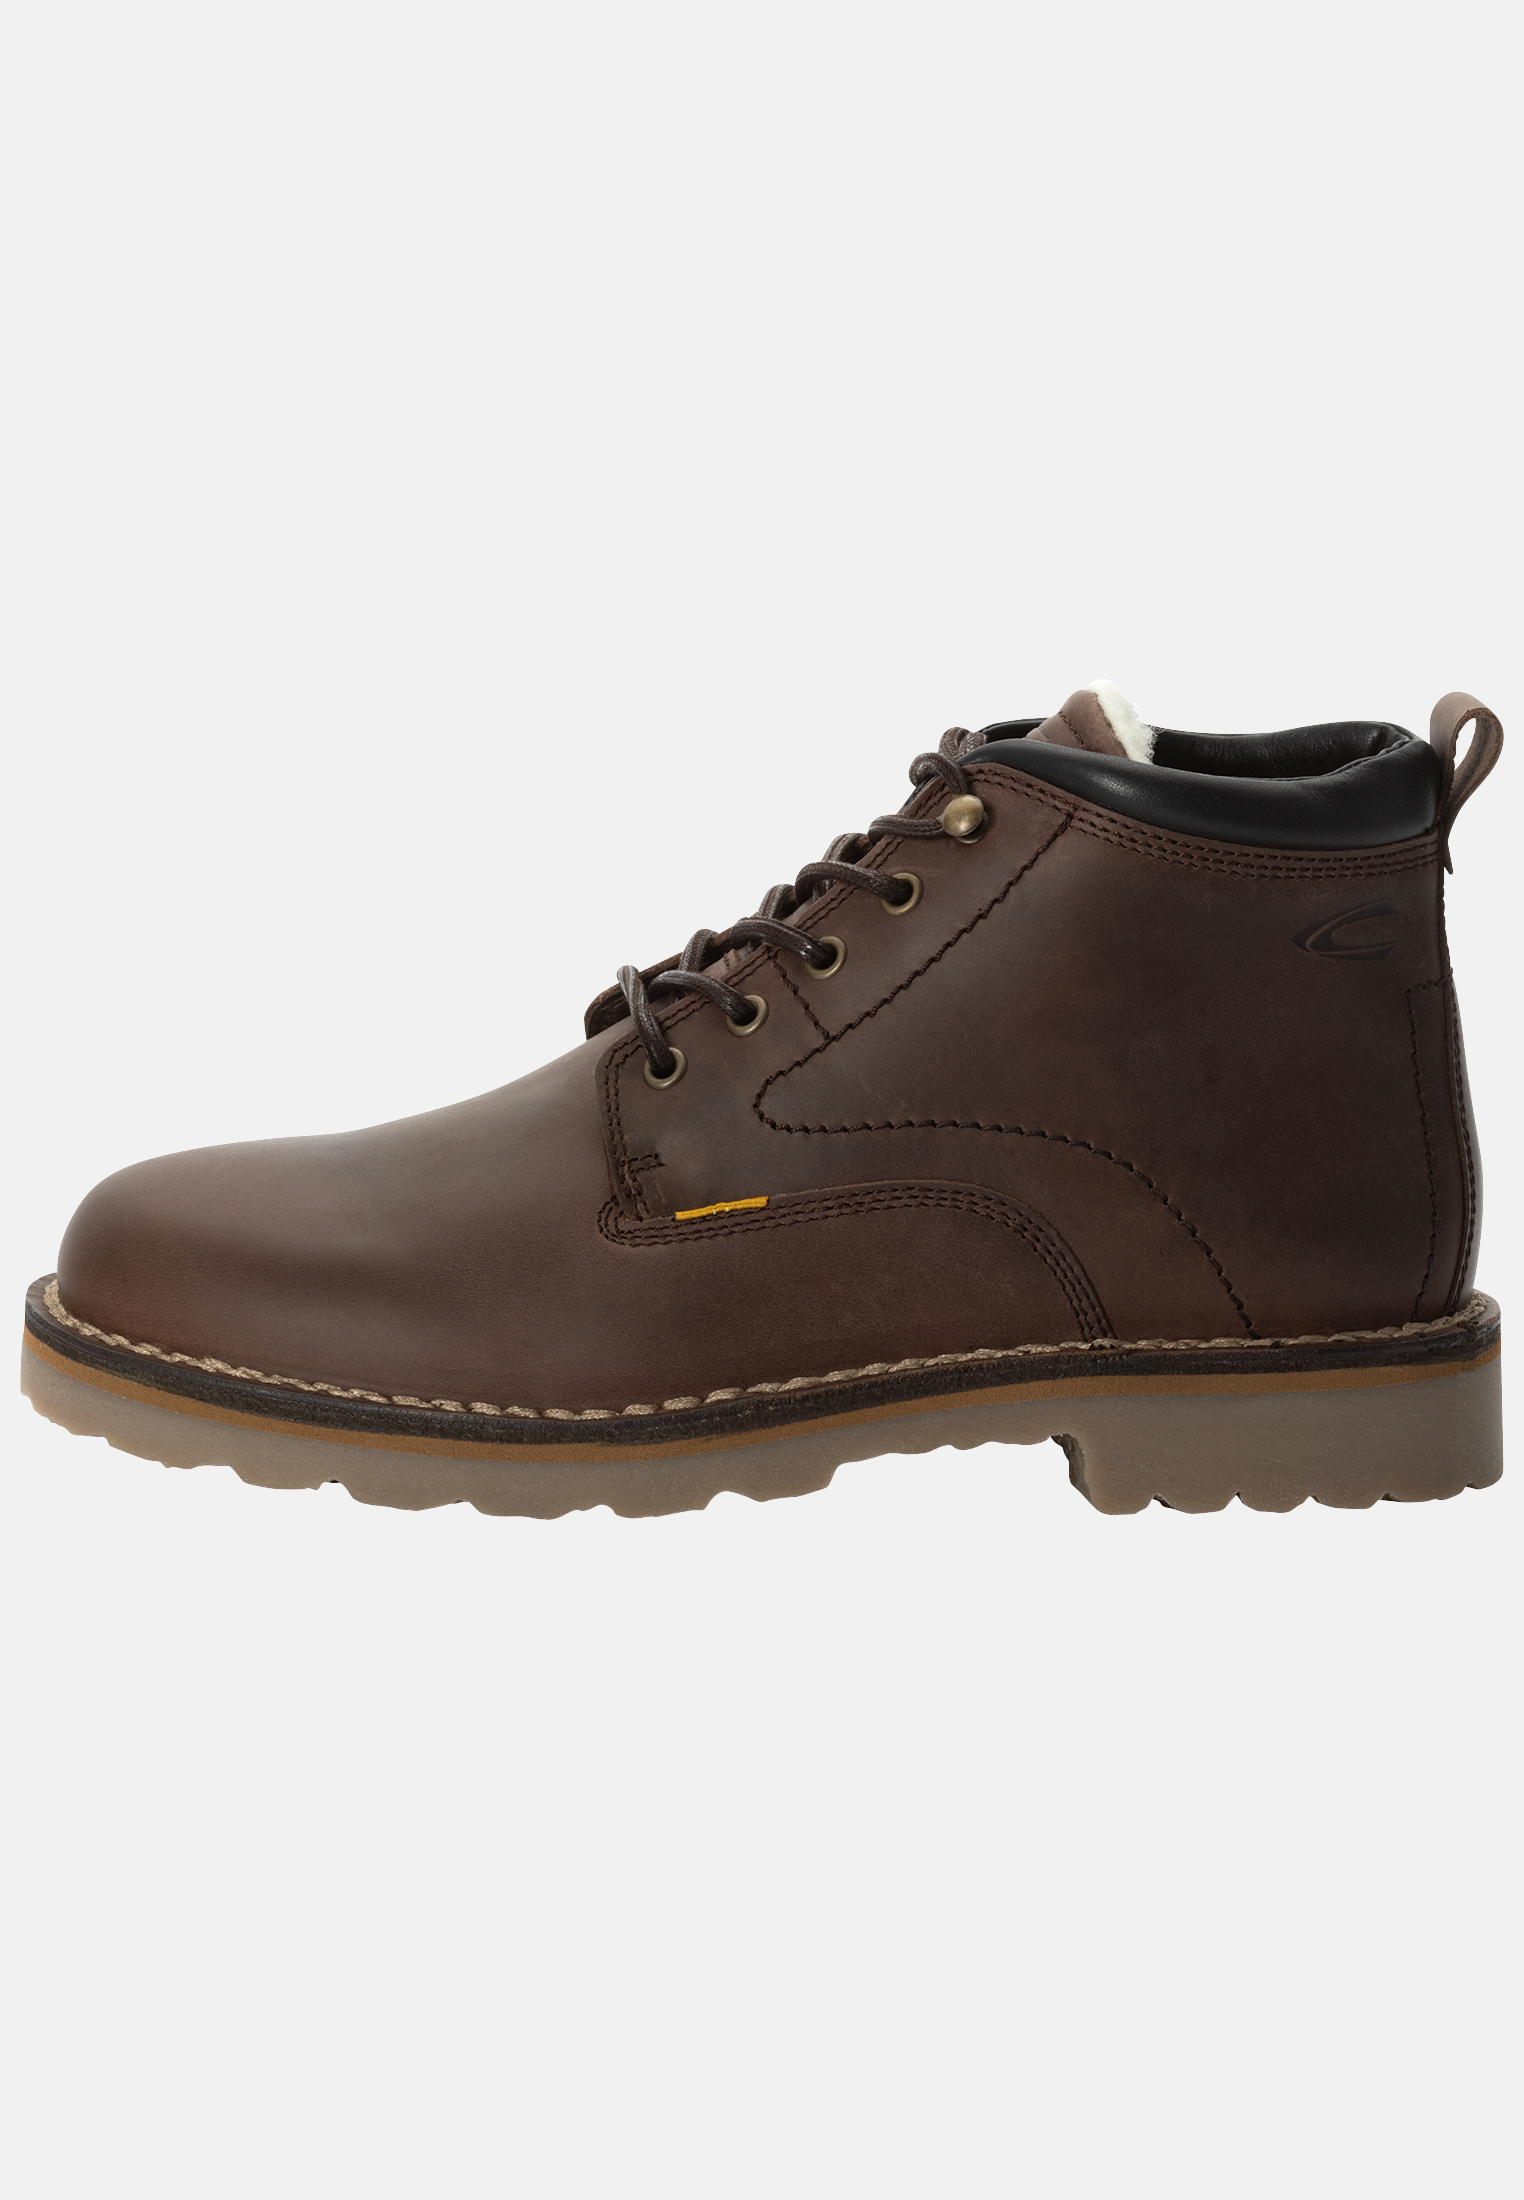 Camel Active Lace-up boot with warm wool lining